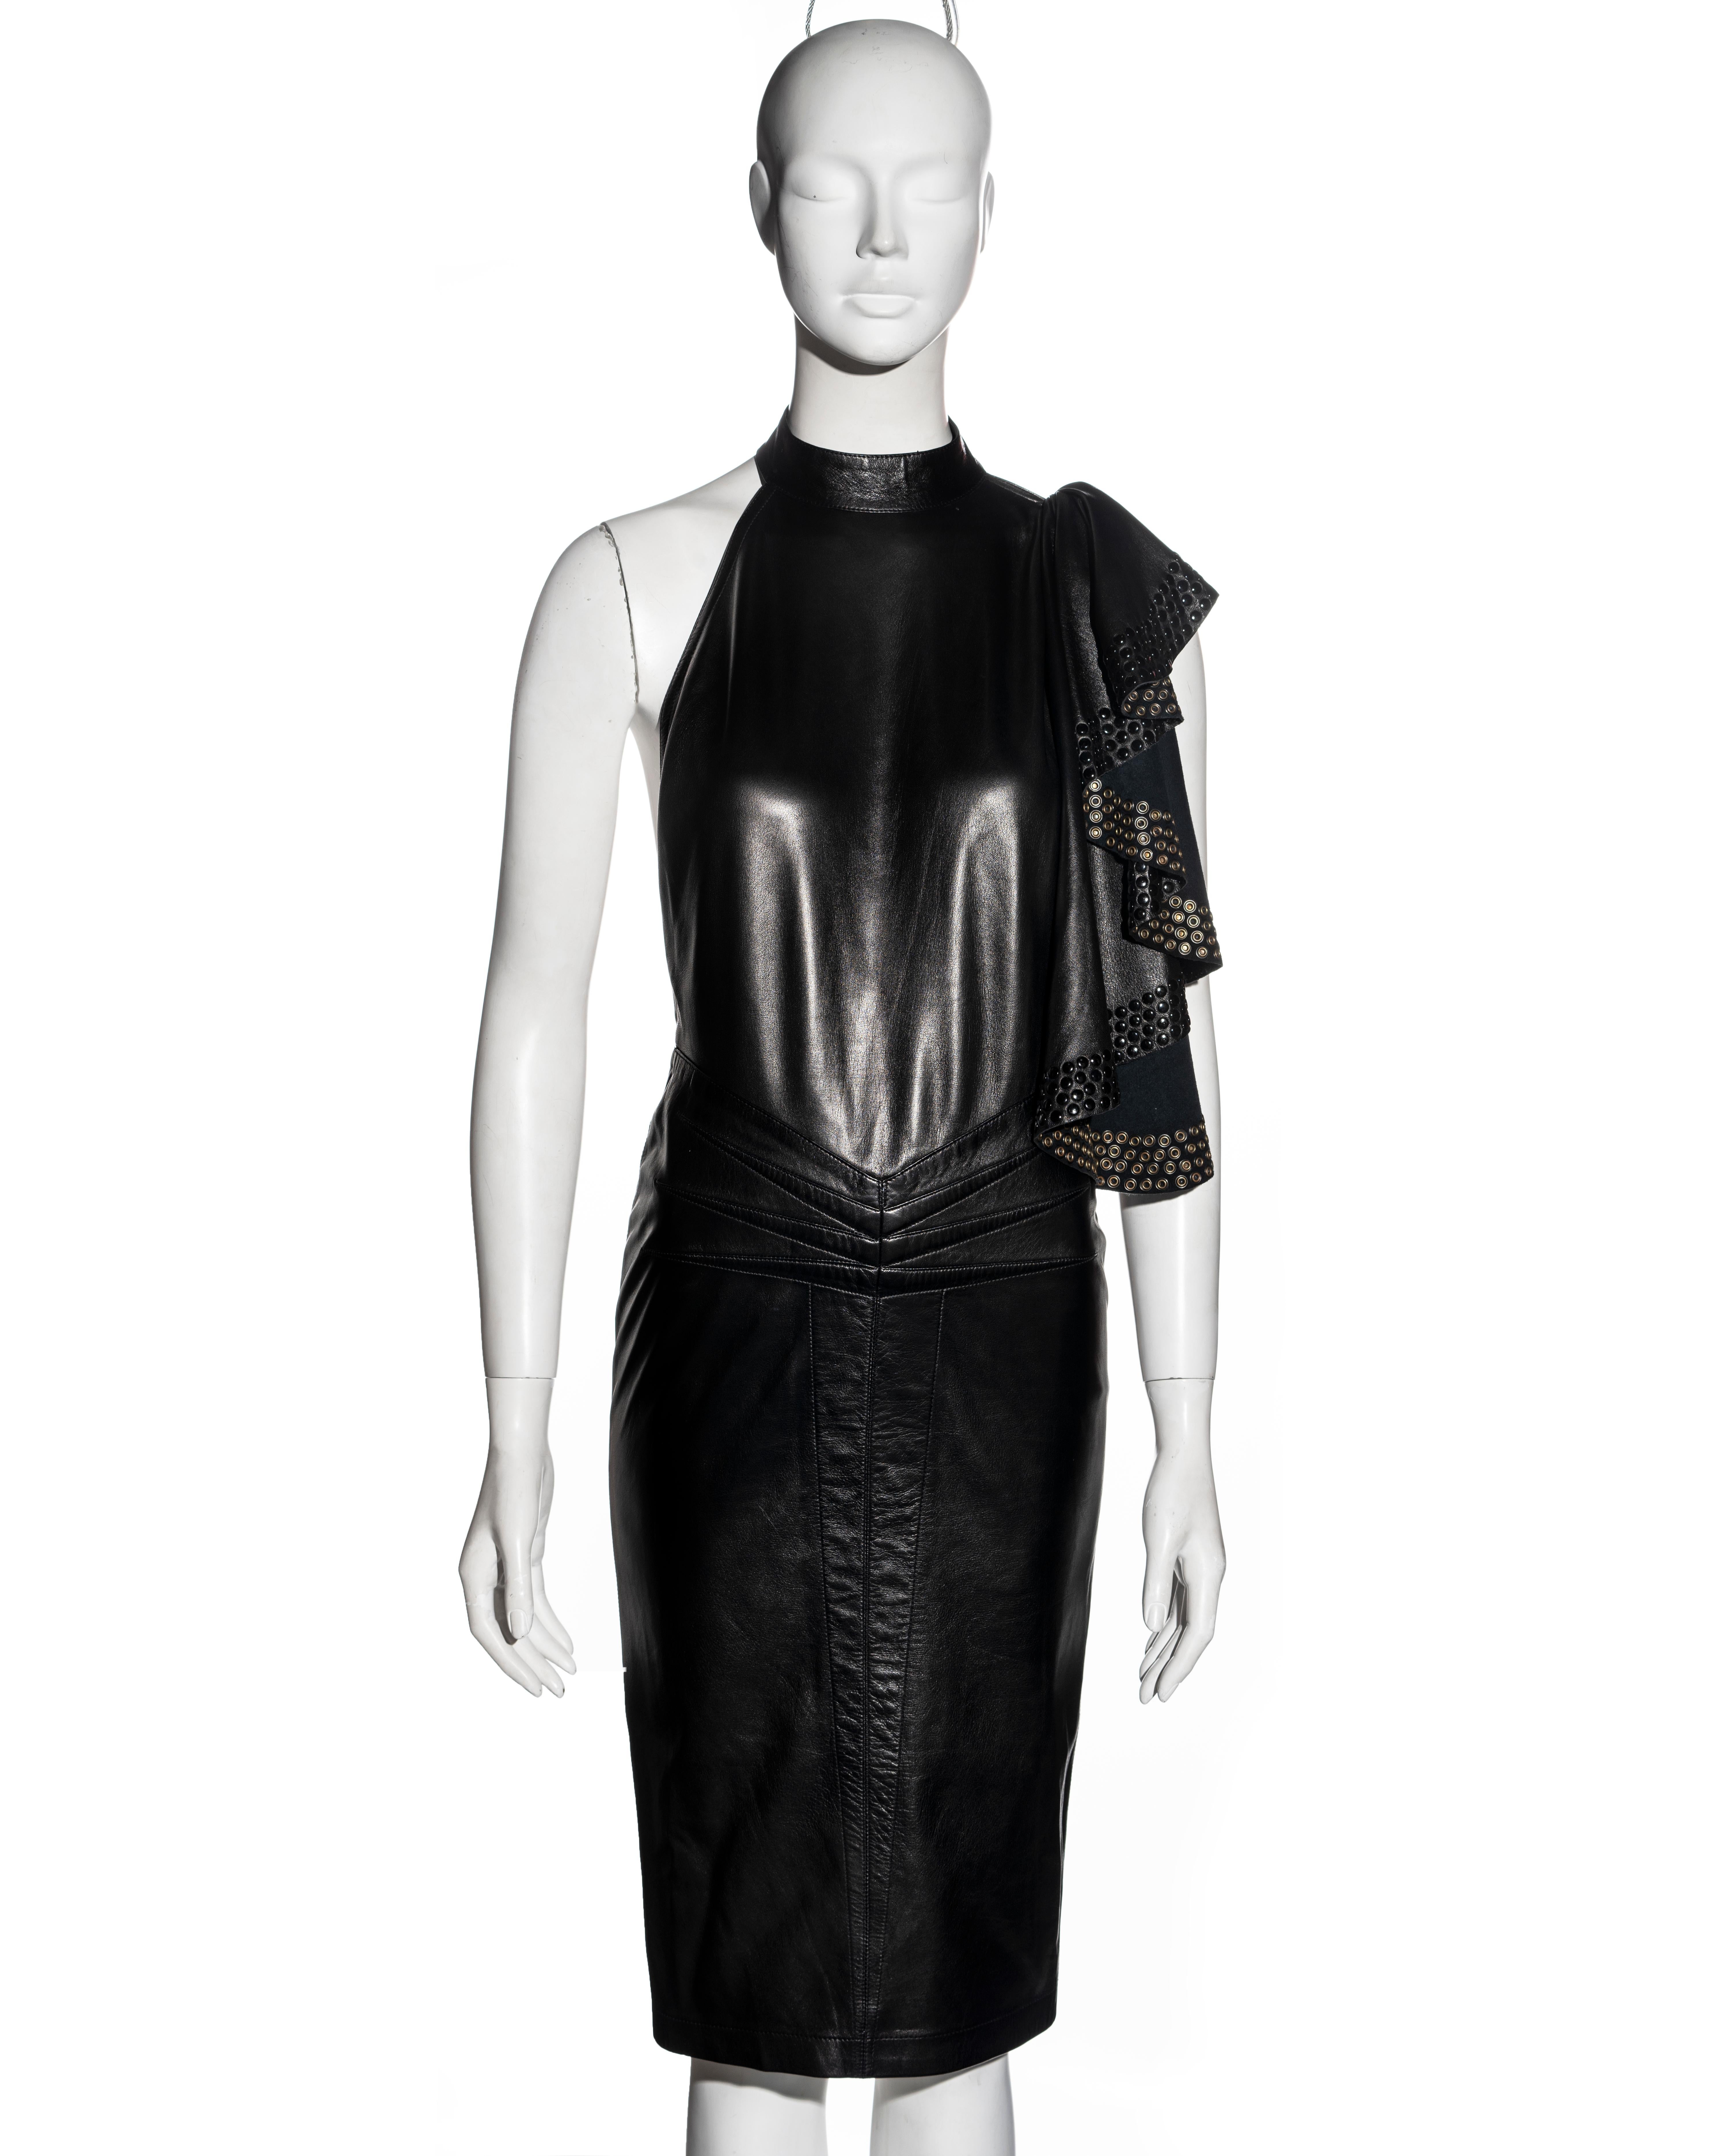 ▪ Important and early Azzedine Alaia black leather dress
▪ Museum grade
▪ Draped panel embellished with metal eyelets
▪ Choker neck 
▪ One strap connecting the shoulder to the waist 
▪ Corset-style lace fastening at the center-back waist
▪ Six darts